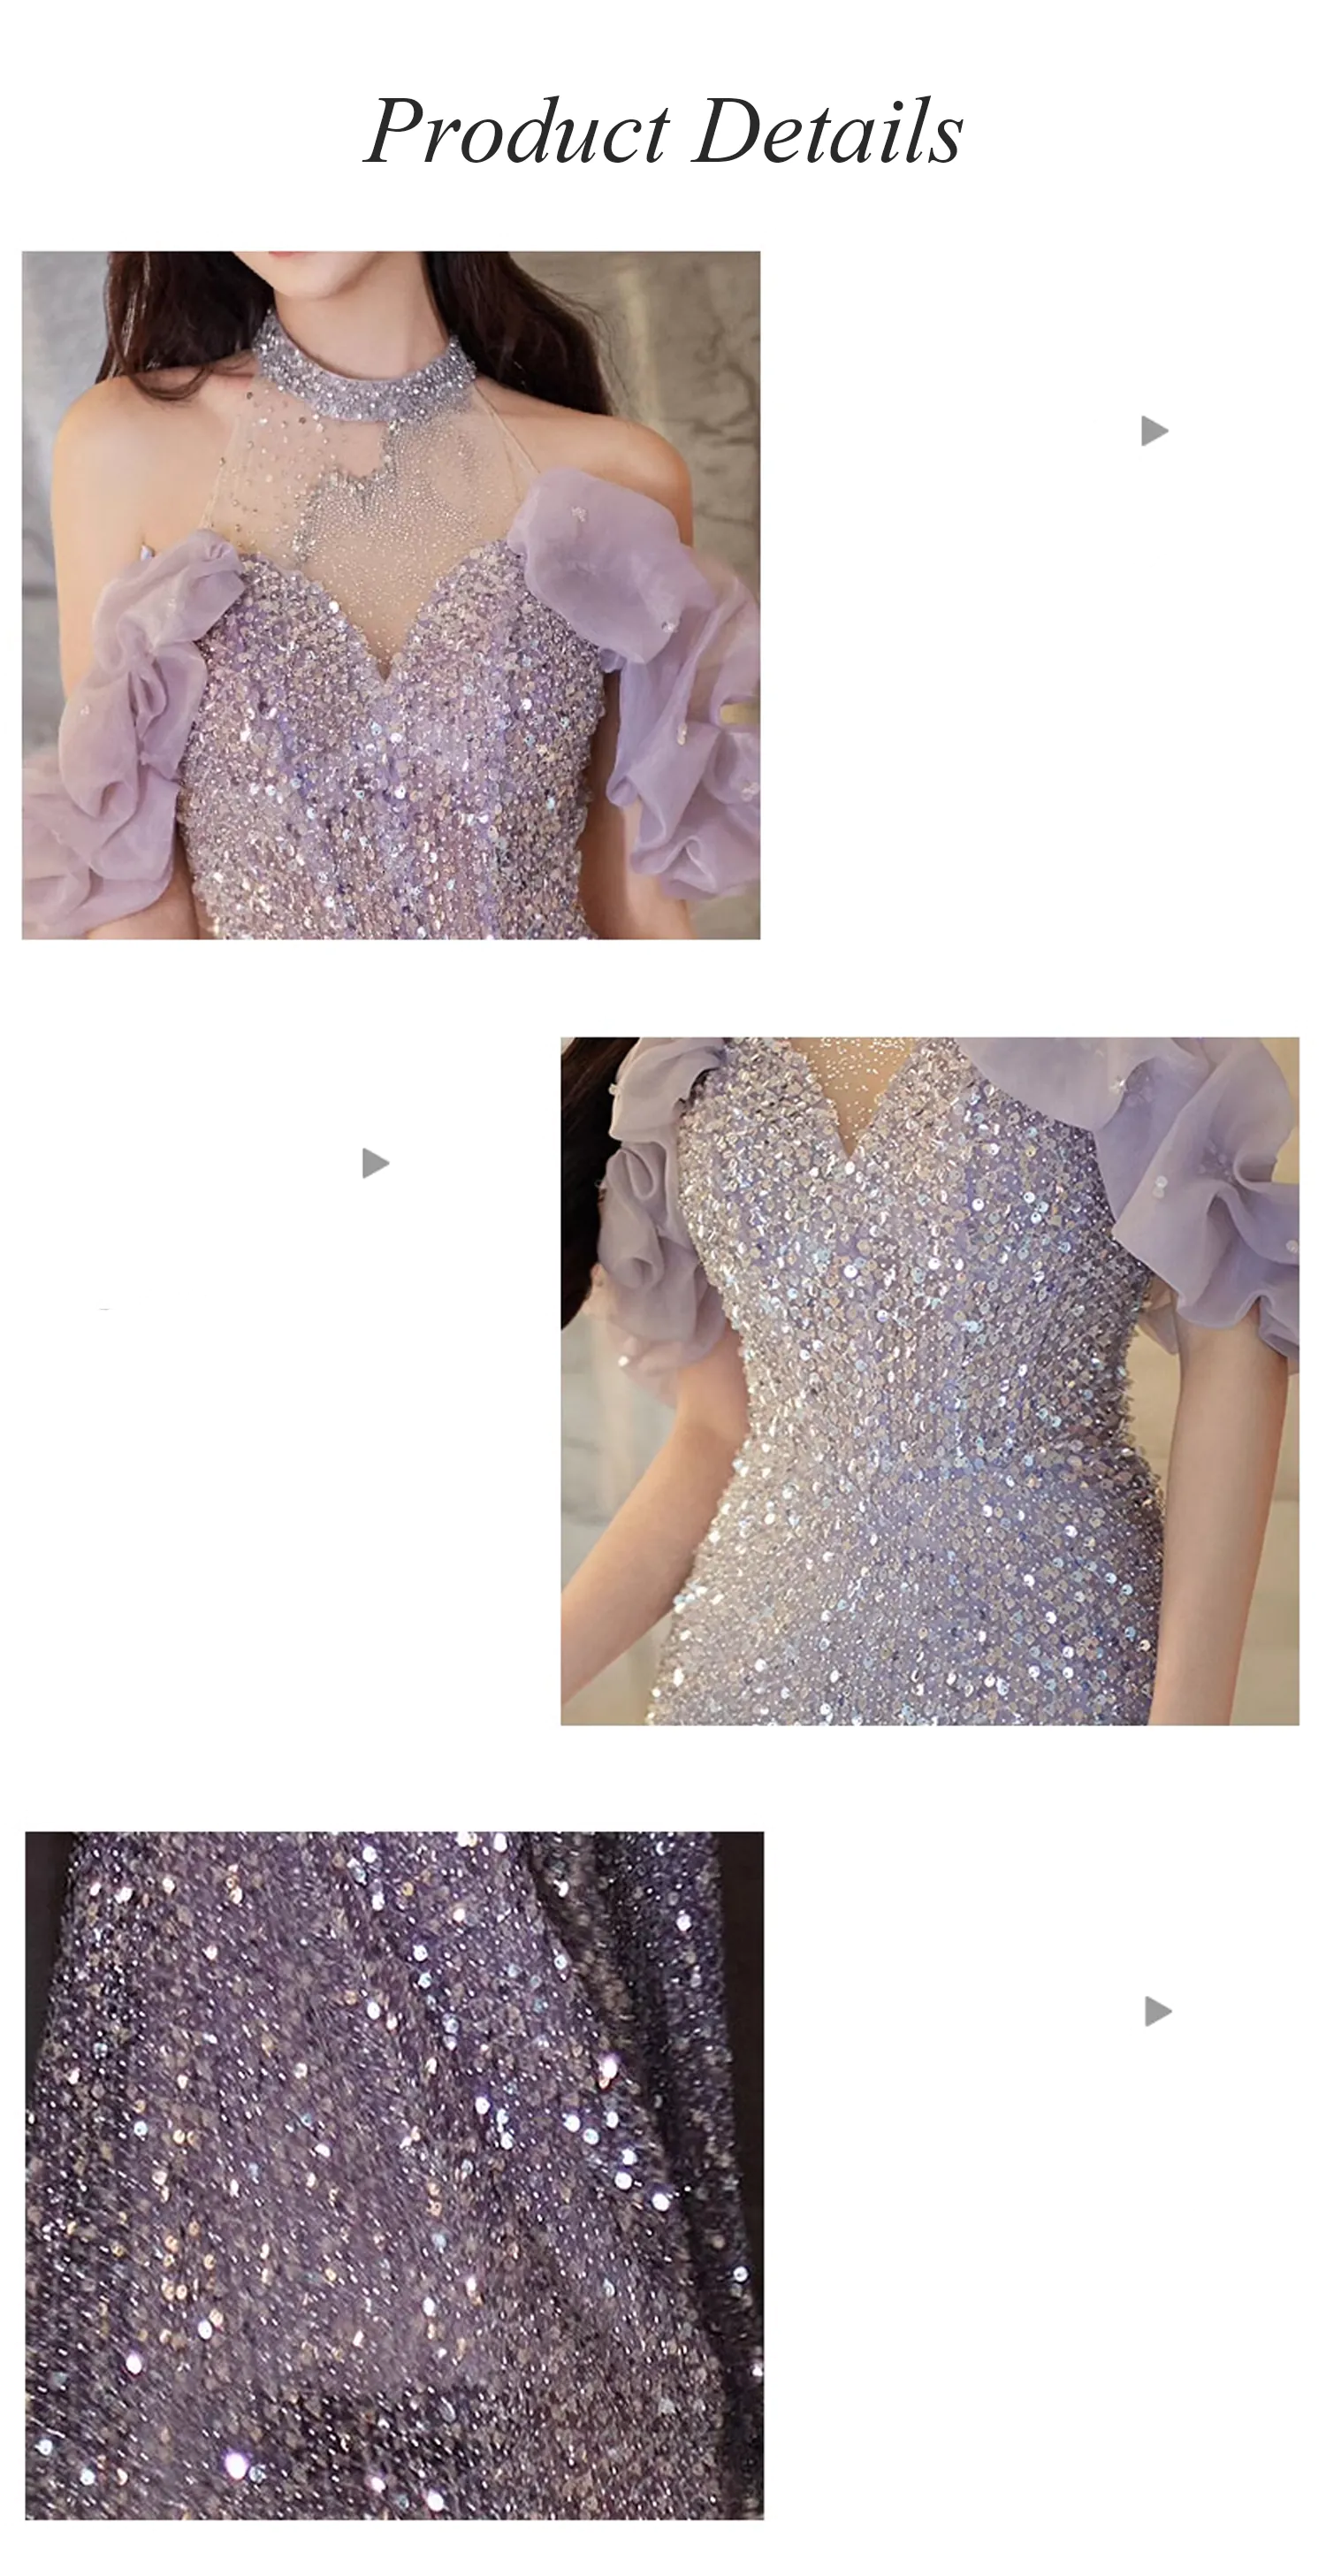 Luxury-Purple-Halter-Sparkle-Fishtail-Party-Evening-Dress-Prom-Gowns13